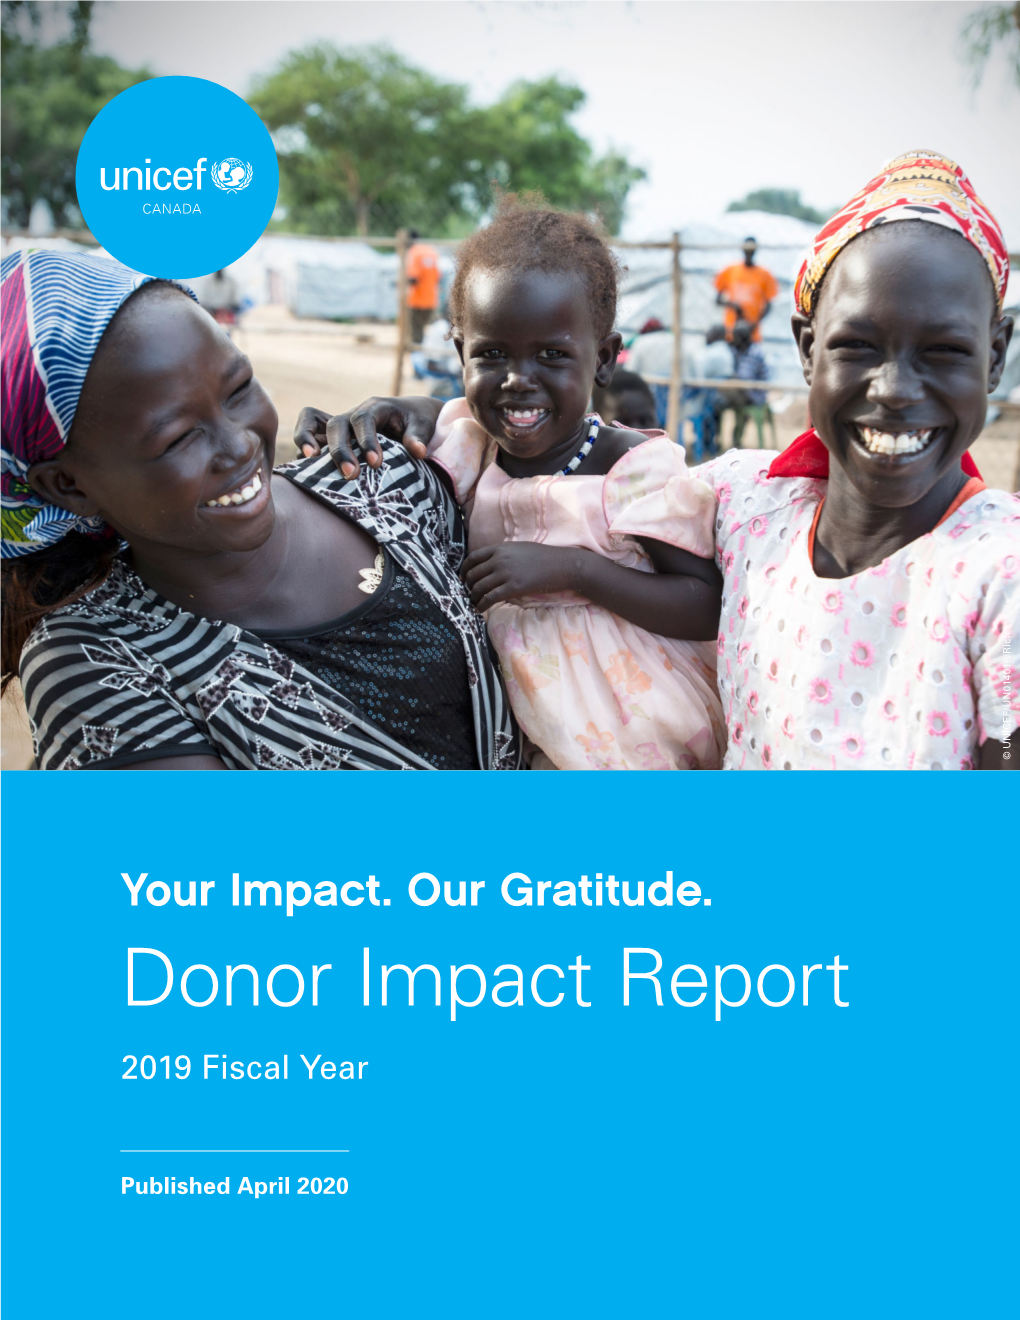 Donor Impact Report 2019 Fiscal Year